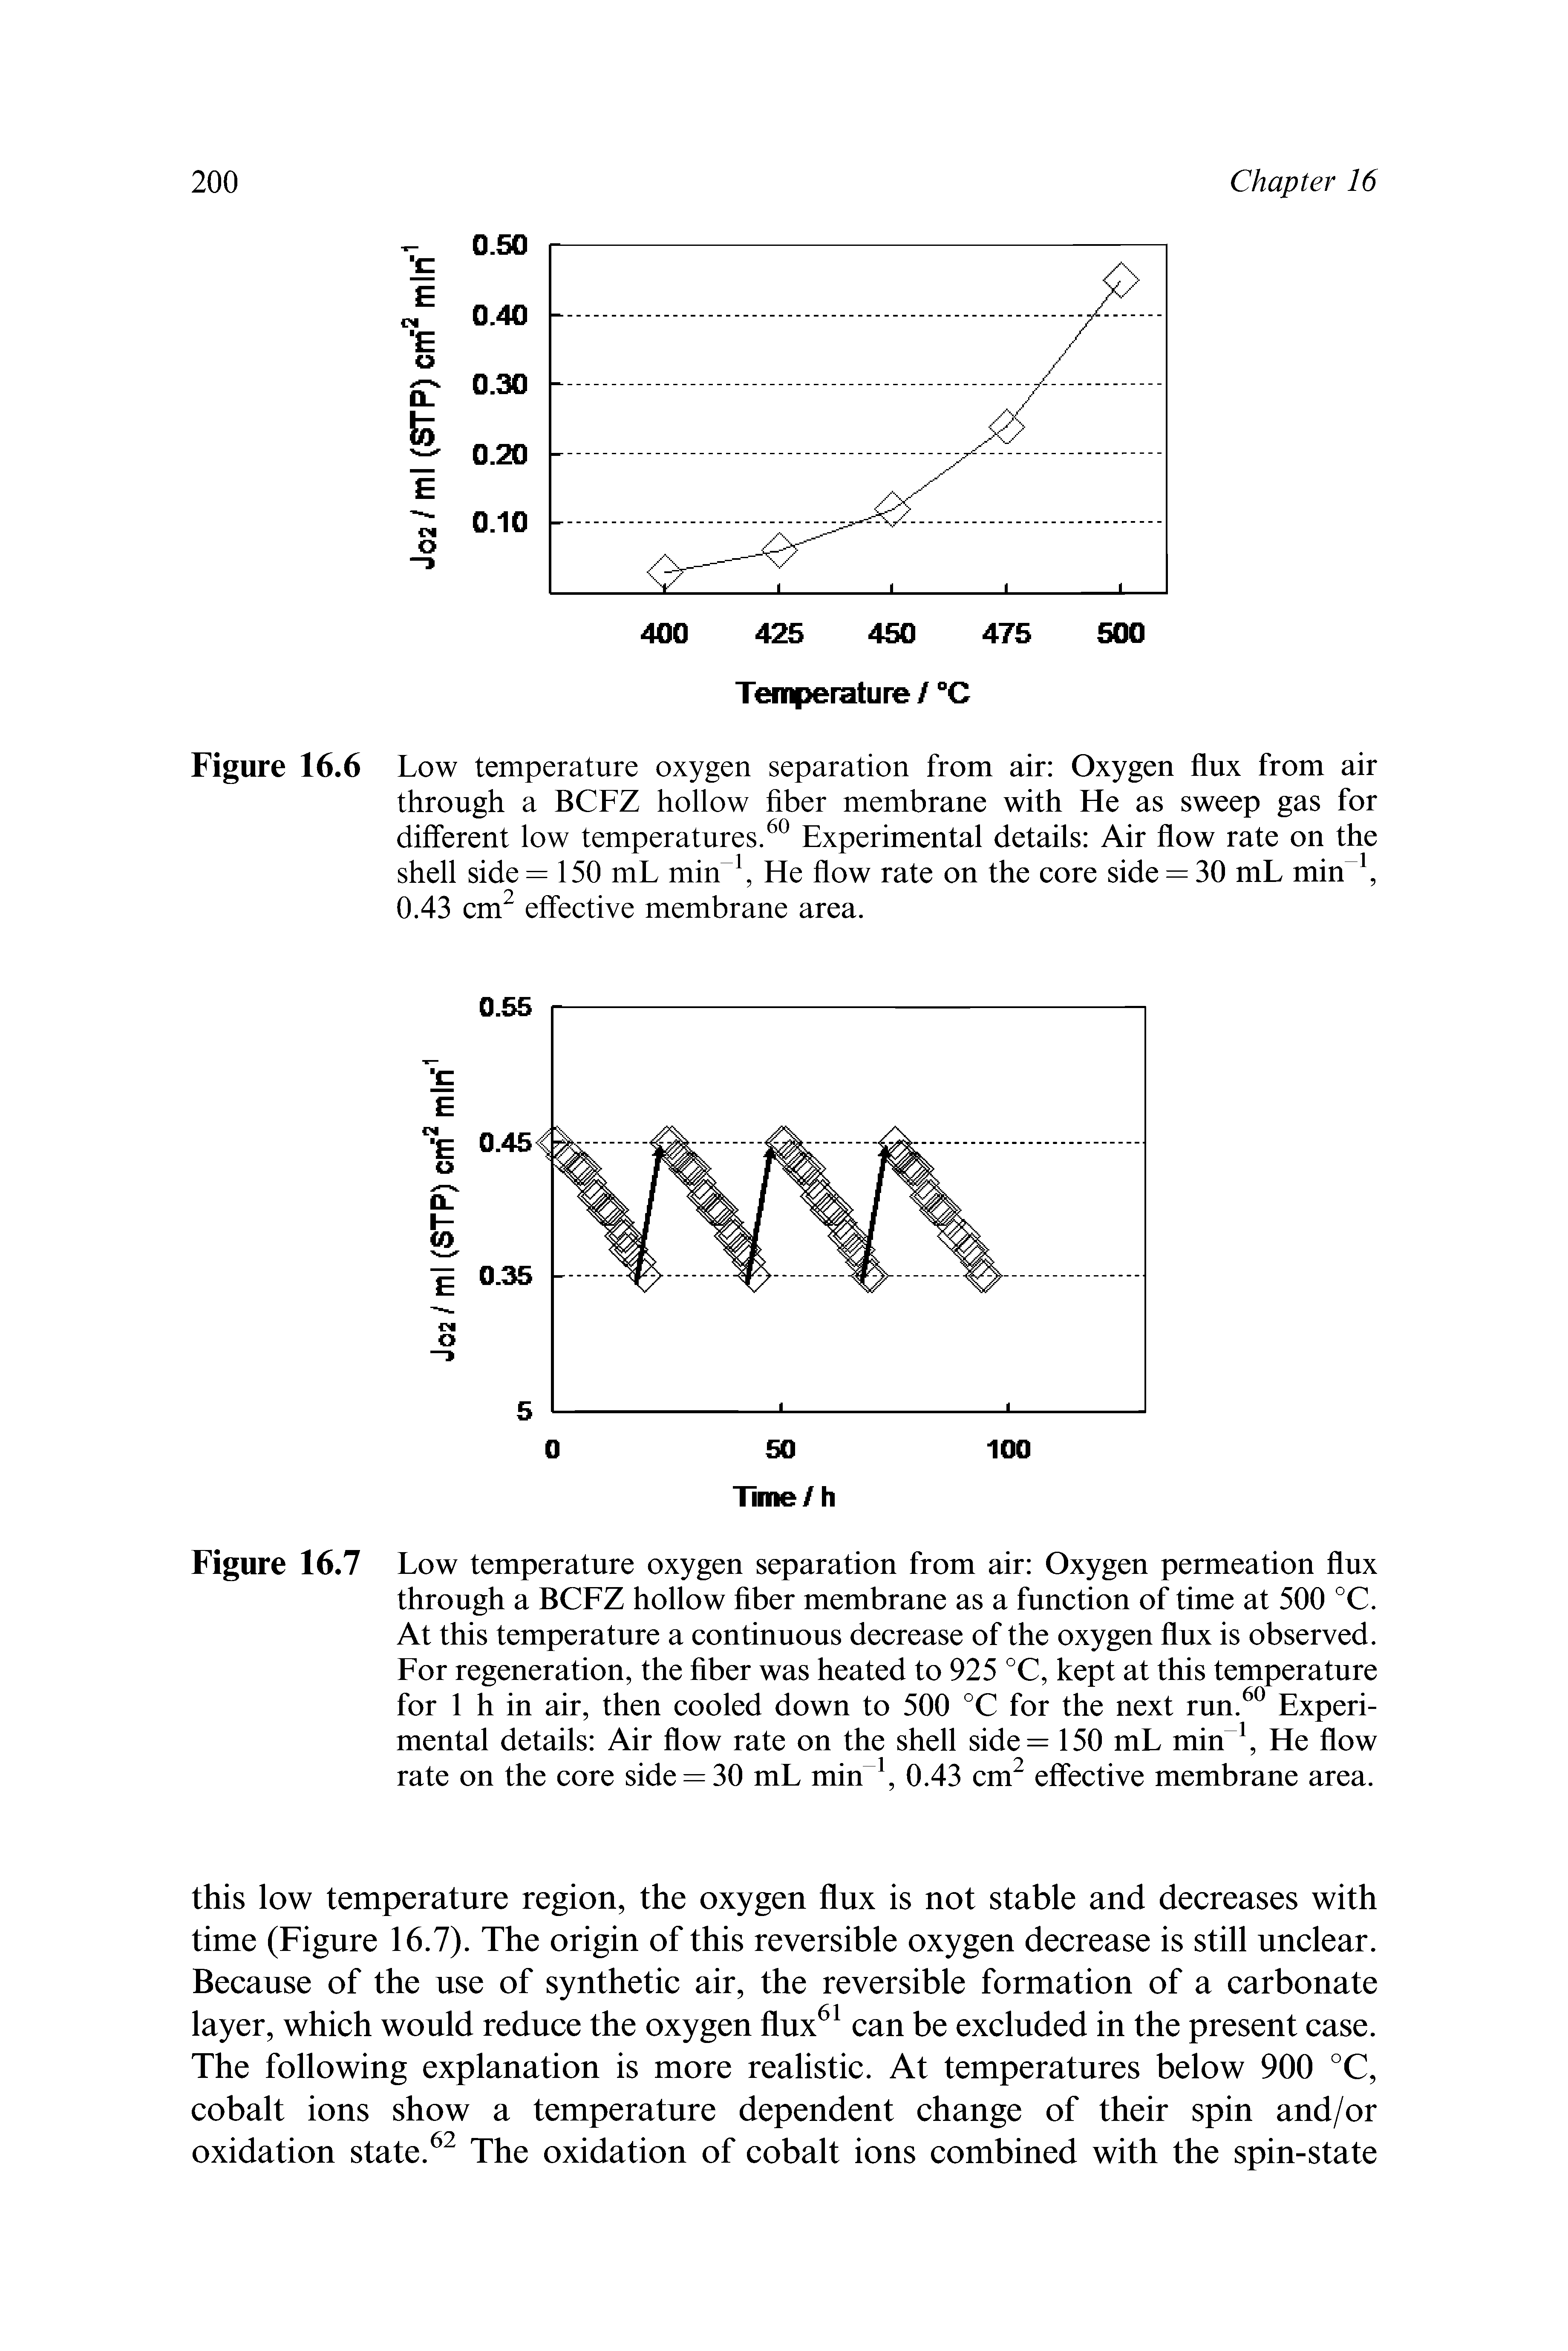 Figure 16.7 Low temperature oxygen separation from air Oxygen permeation flux through a BCFZ hollow fiber membrane as a function of time at 500 °C. At this temperature a continuous decrease of the oxygen flux is observed. For regeneration, the fiber was heated to 925 °C, kept at this temperature for 1 h in air, then cooled down to 500 °C for the next run. Experimental details Air flow rate on the shell side= 150 mL min He flow rate on the core side = 30 mL min 0.43 cm effective membrane area.